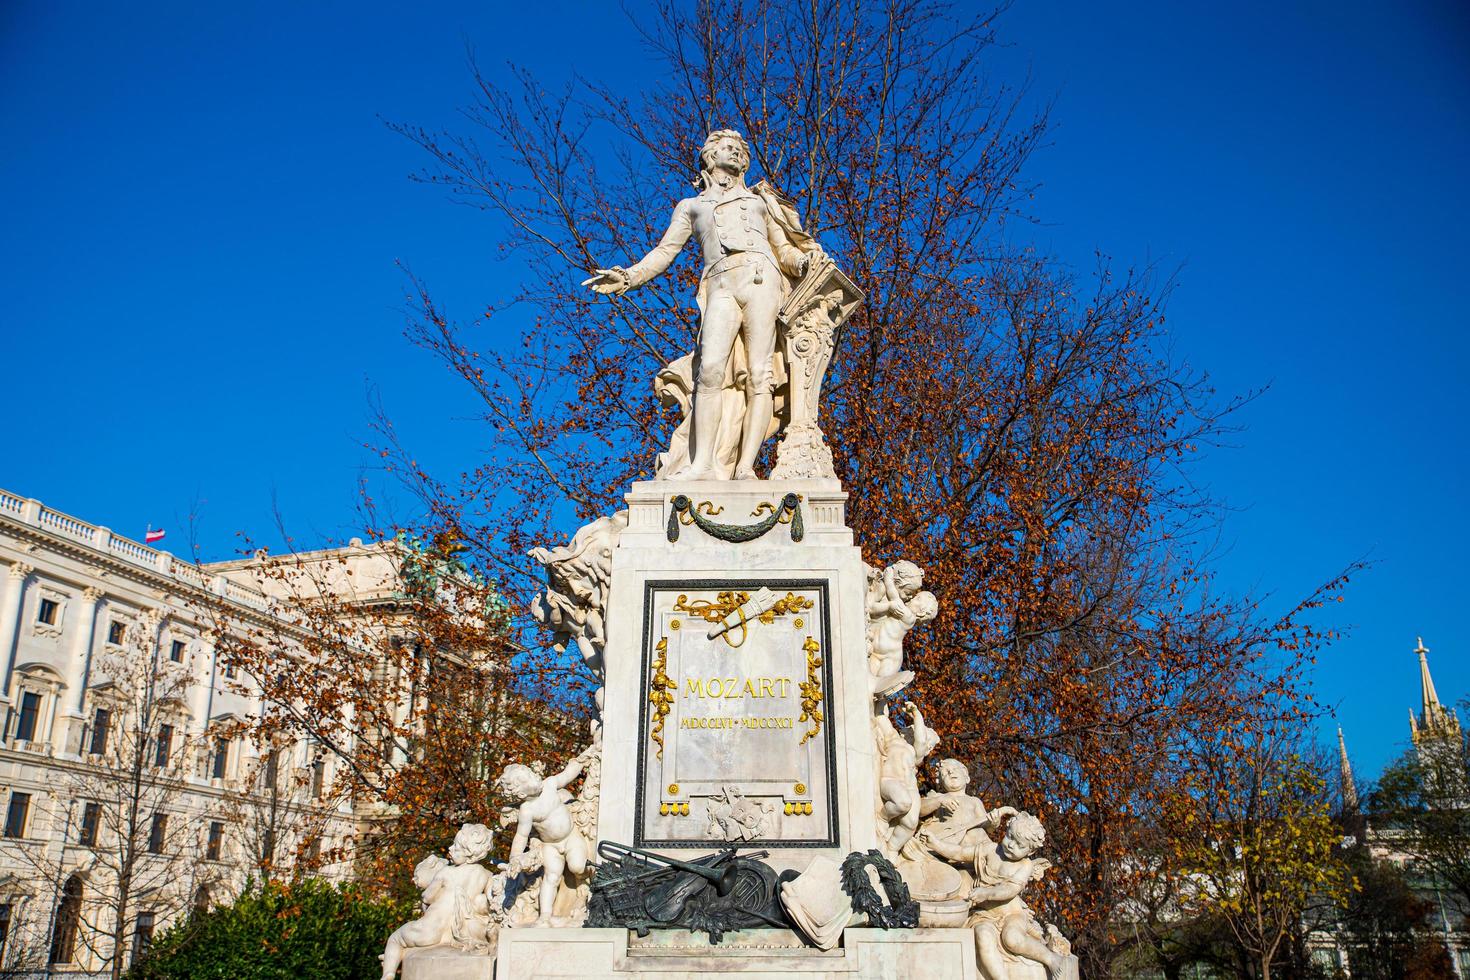 Vienna, Austria 2021 - Marble Statue dedicated to the famous compositor and musician Wolfgang Amadeus Mozart on a sunny day in Burggarten garden in Vienna, Austria photo